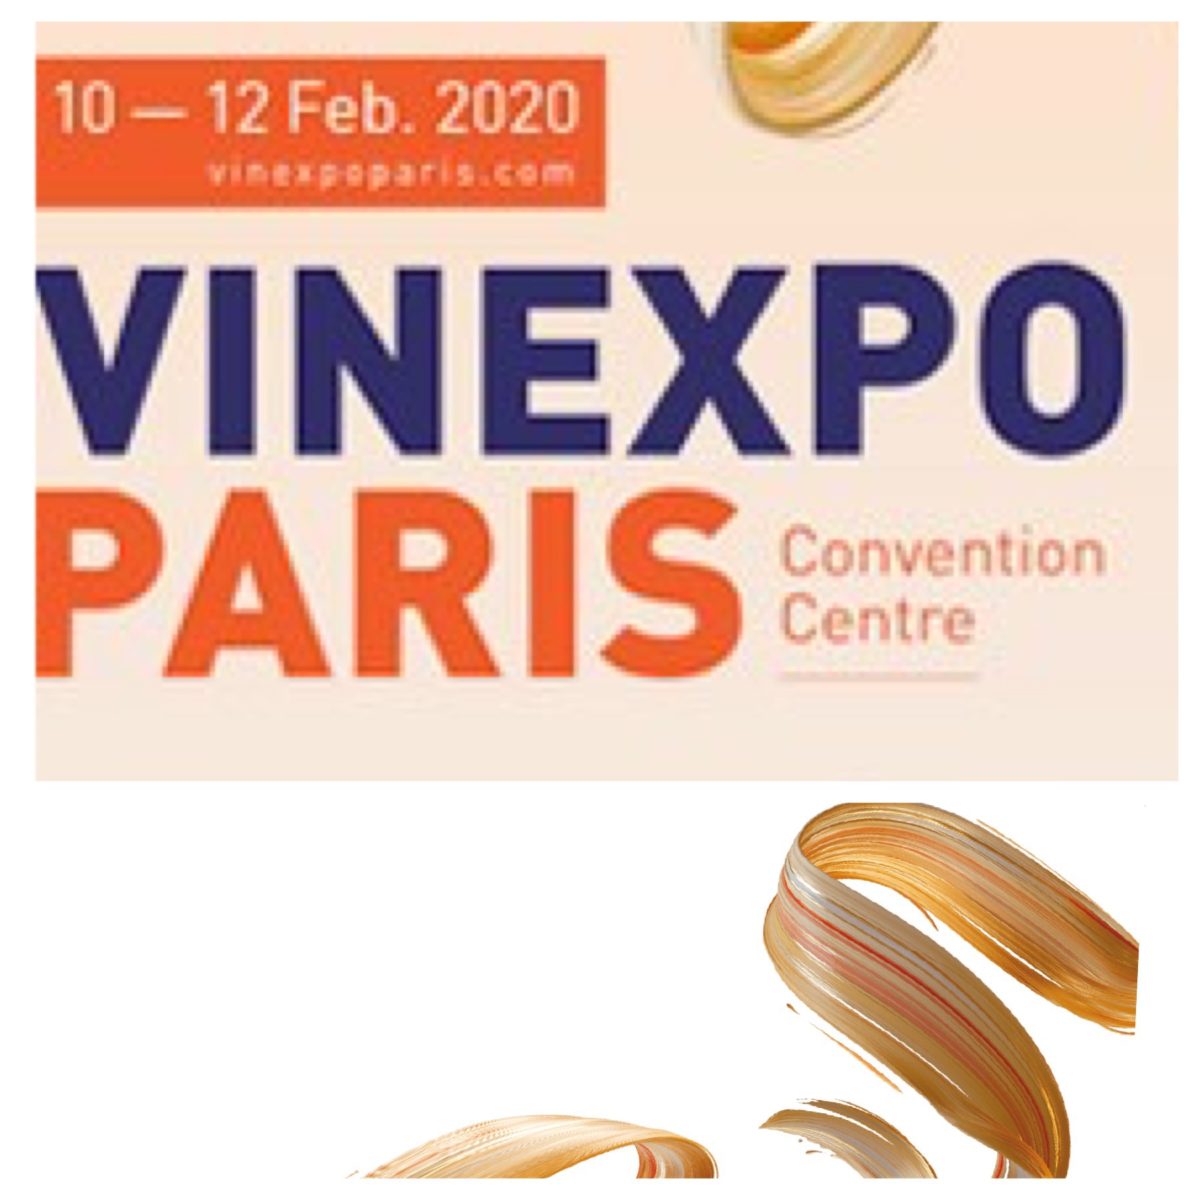 Vinexpo Paris 2020 under the patronage of the President of the French Republic